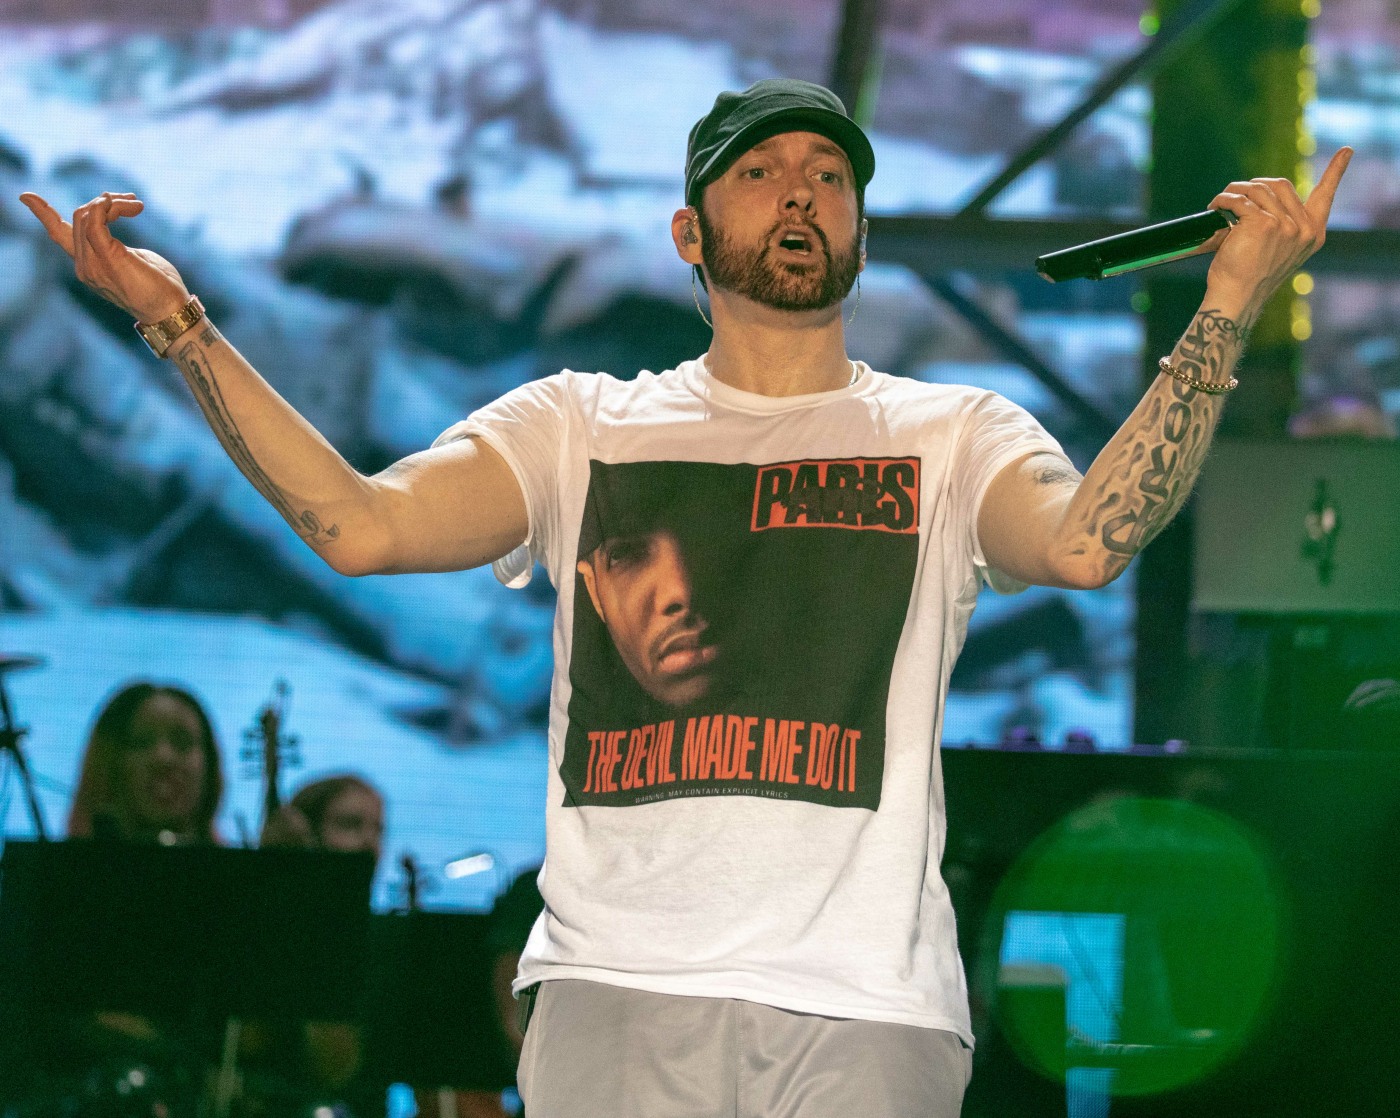 EMINEM (MARSHALL MATHERS) during Bonnaroo Music Festival 2018 in Manchester, Tennessee (Credit Image: © Daniel DeSlover via ZUMA Wire)